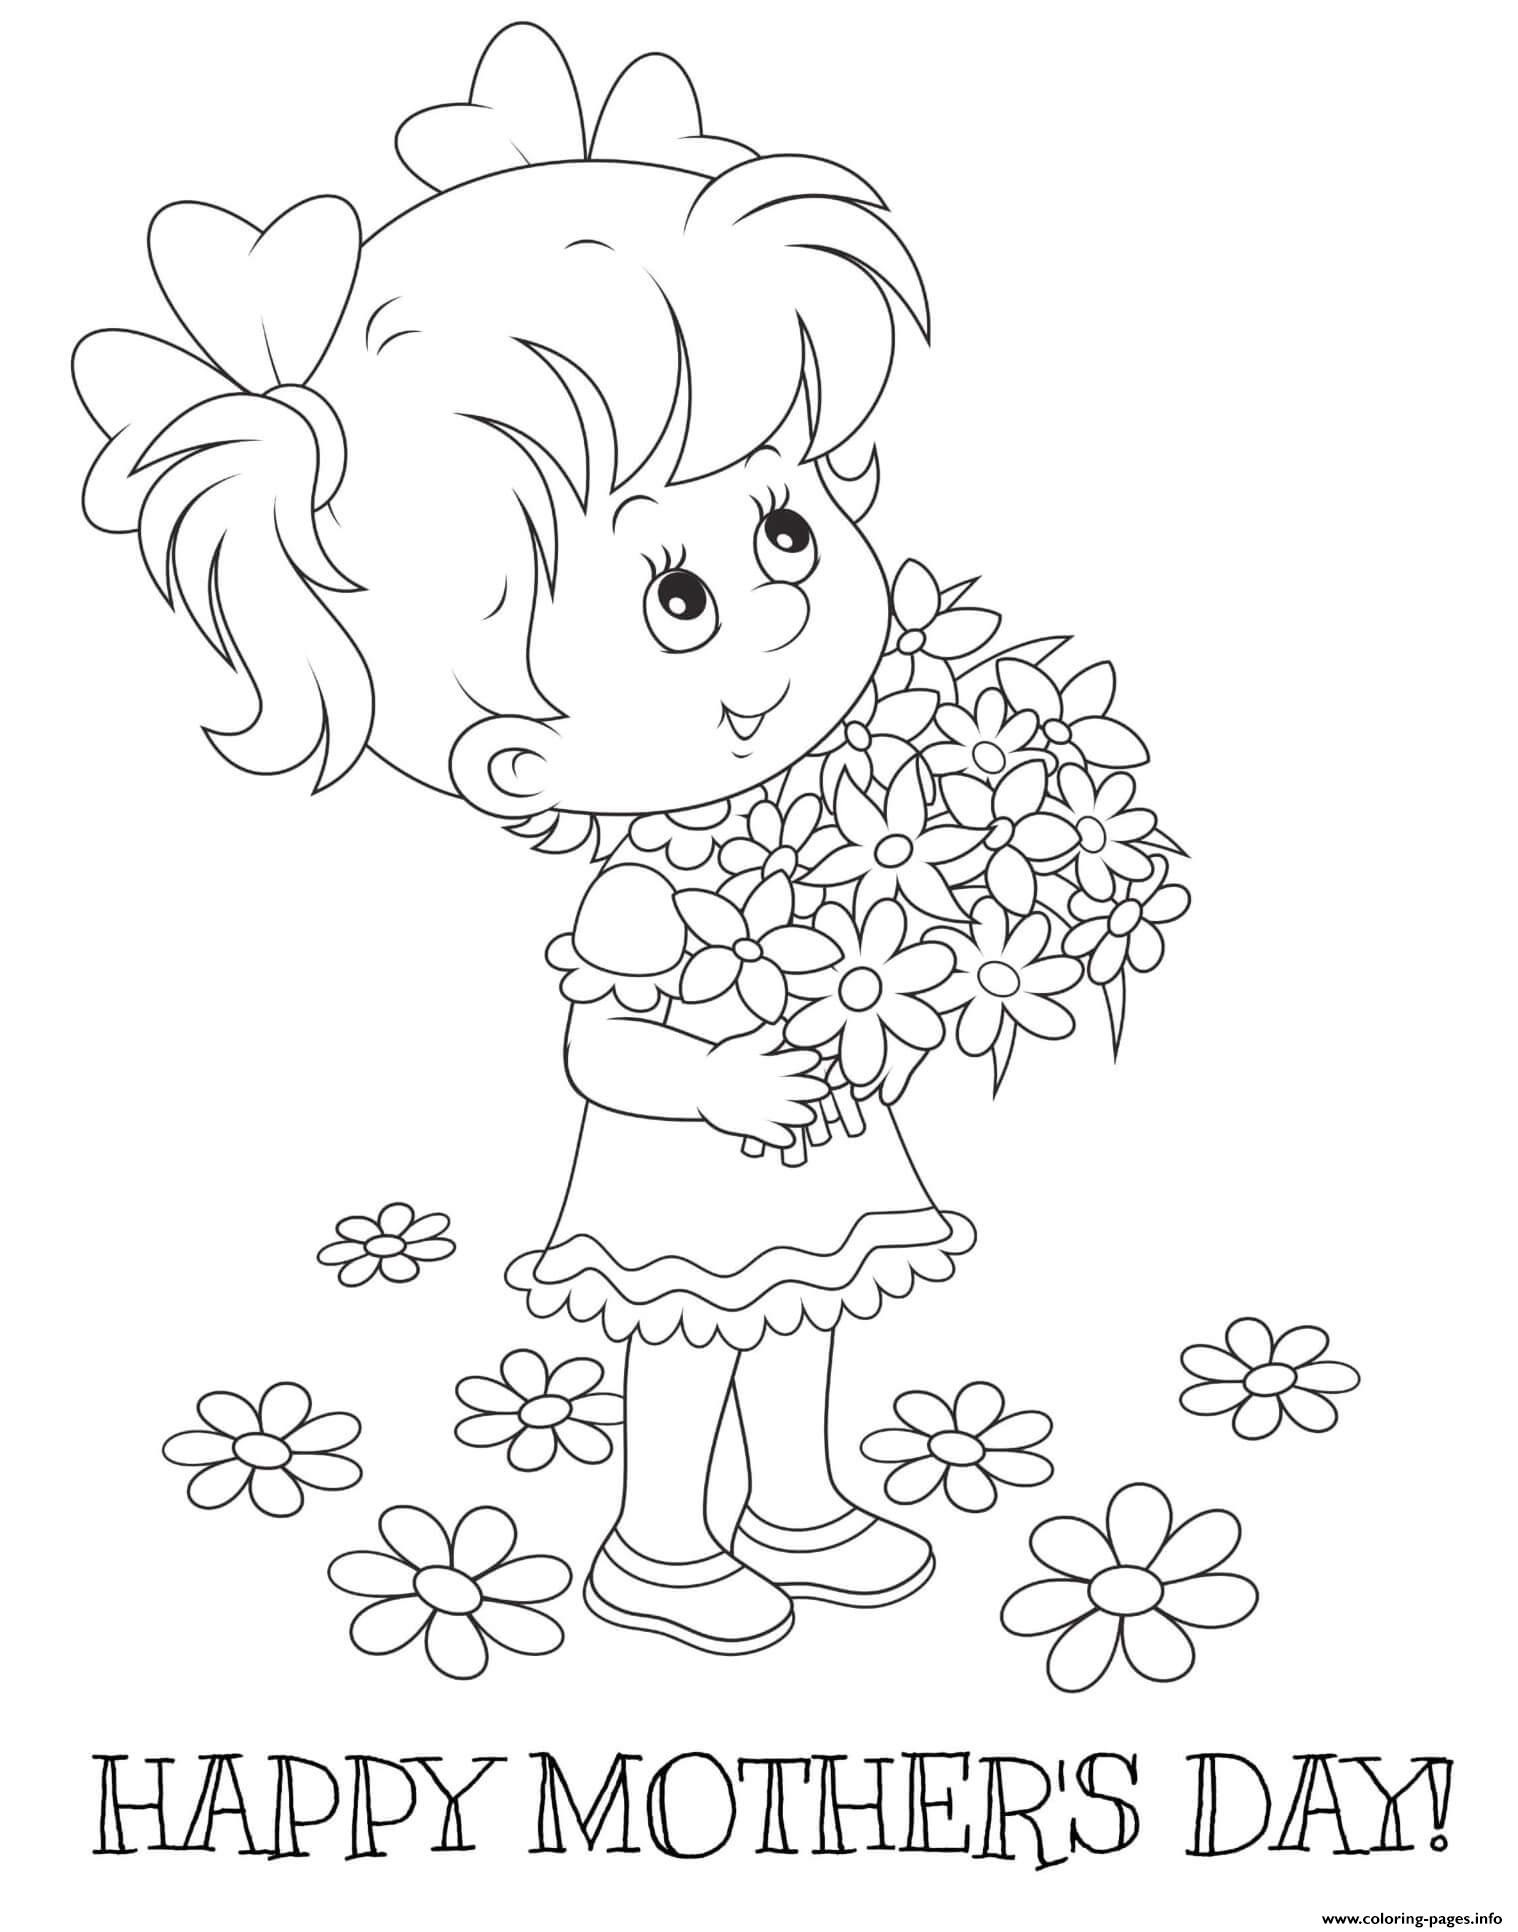 mothers-day-girl-bouquet-flowers-coloring-page-printable